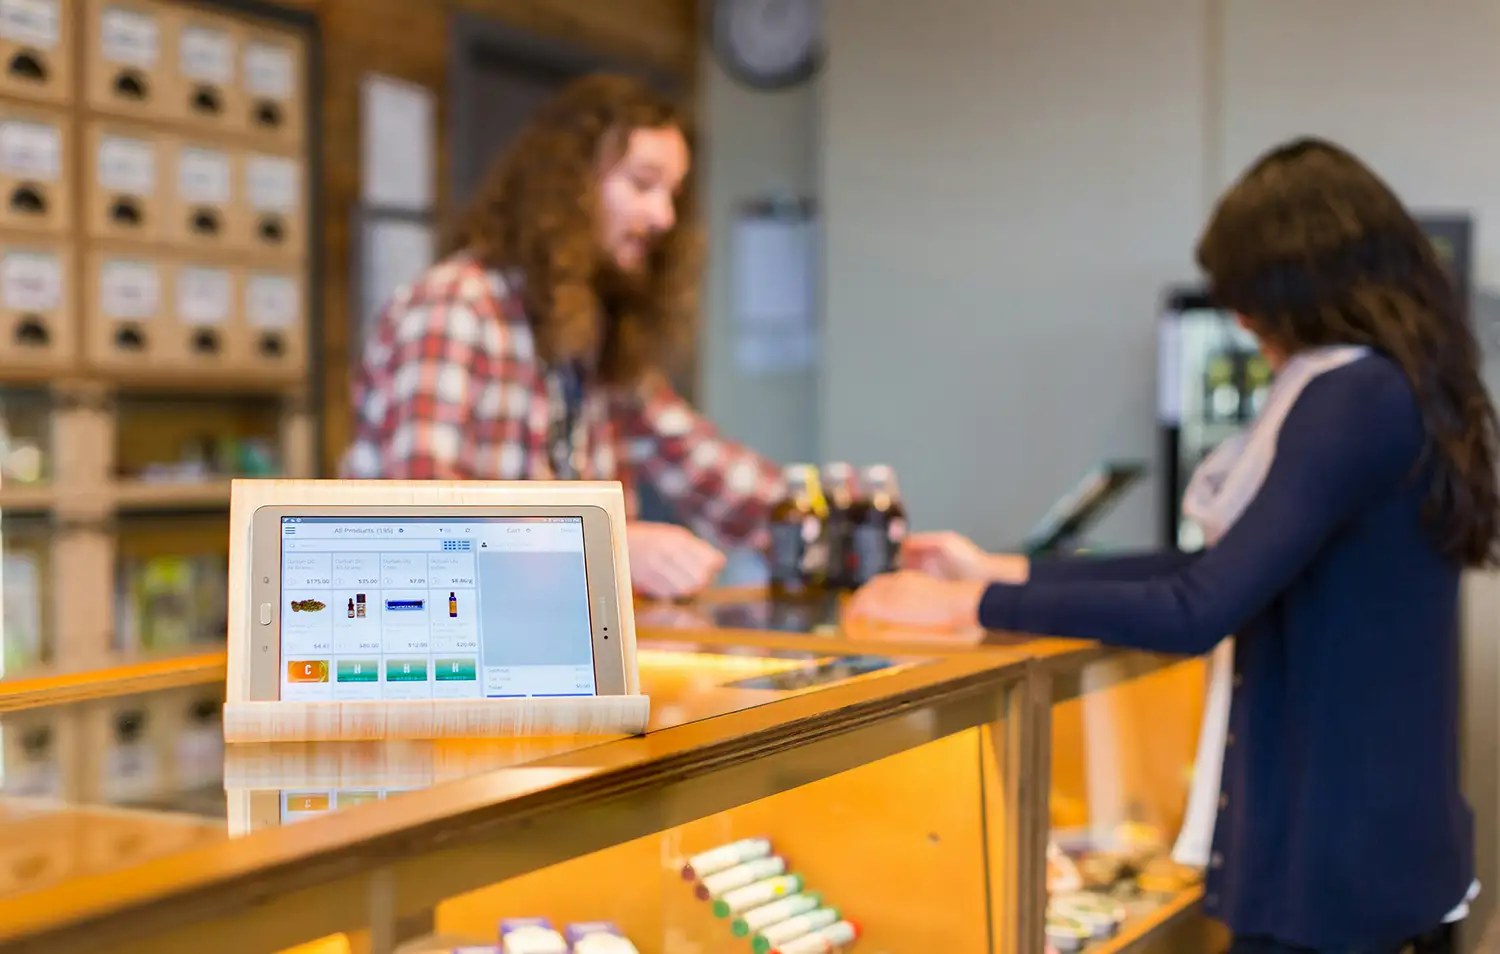 An image of two young people at a dispensary, which can be one of many high risk merchant accounts that are flagged on the MATCH list